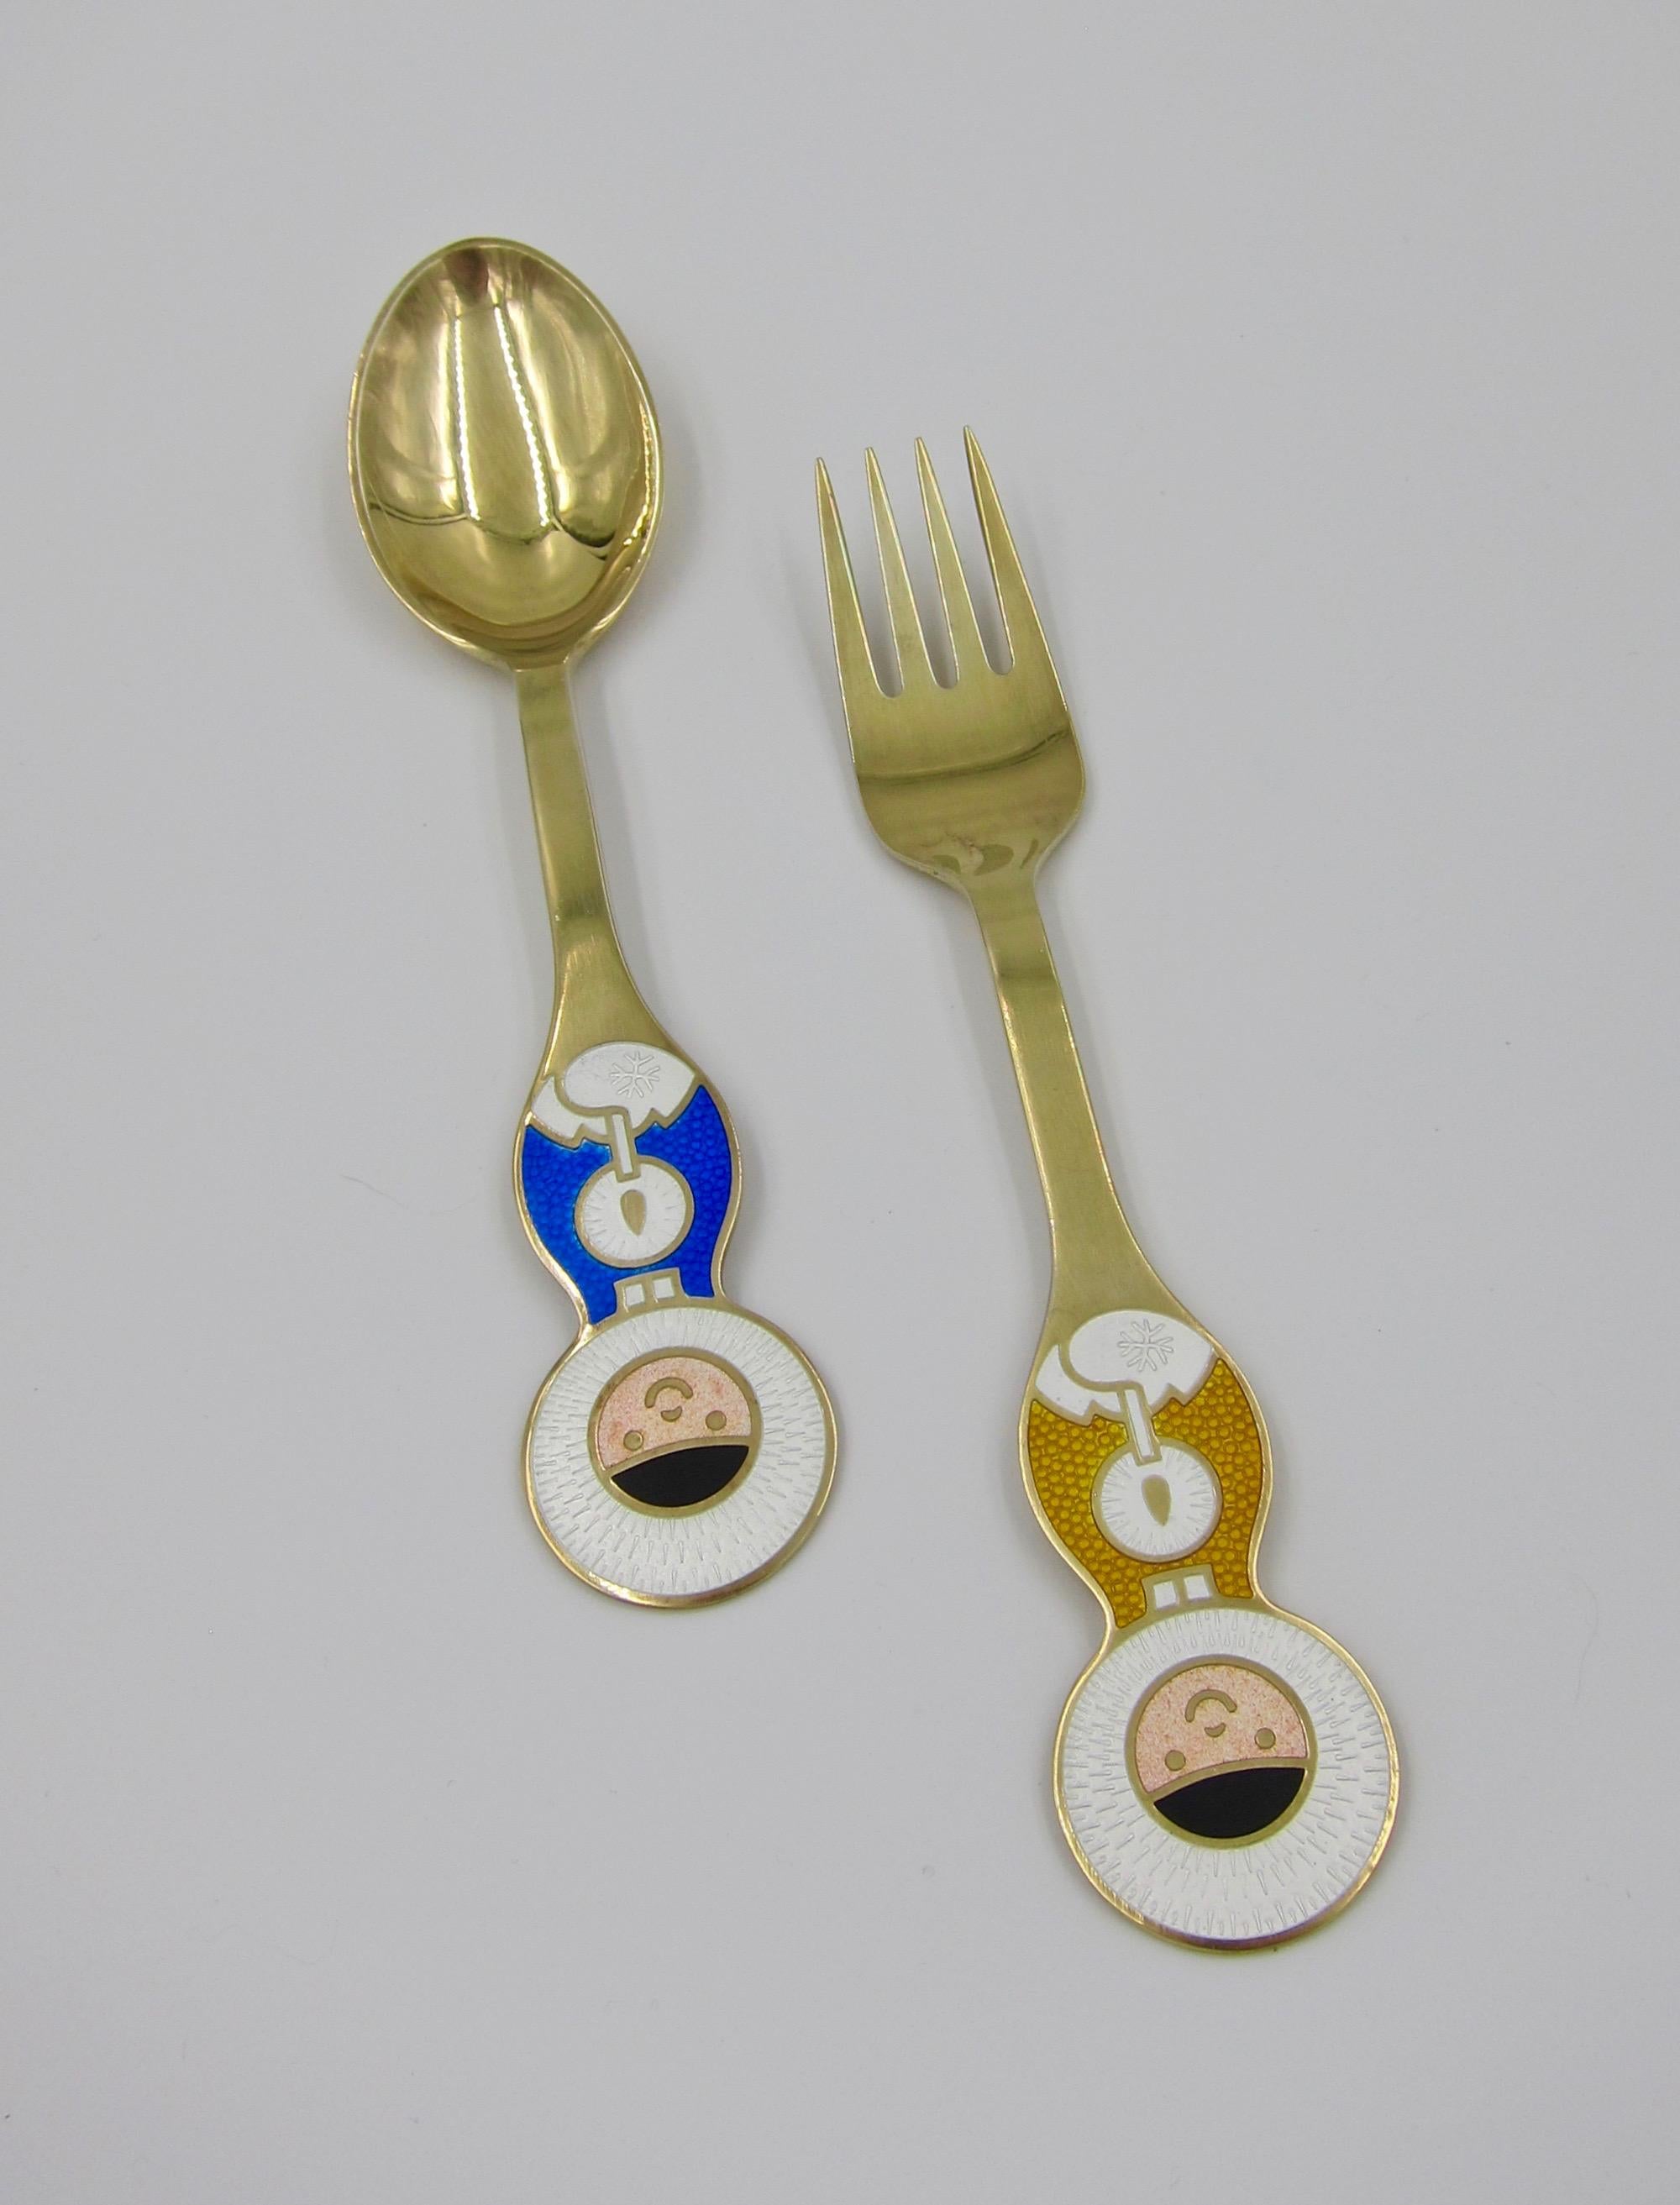 1969 Anton Michelsen Gilt Silver and Enamel Christmas Fork and Spoon Set 4